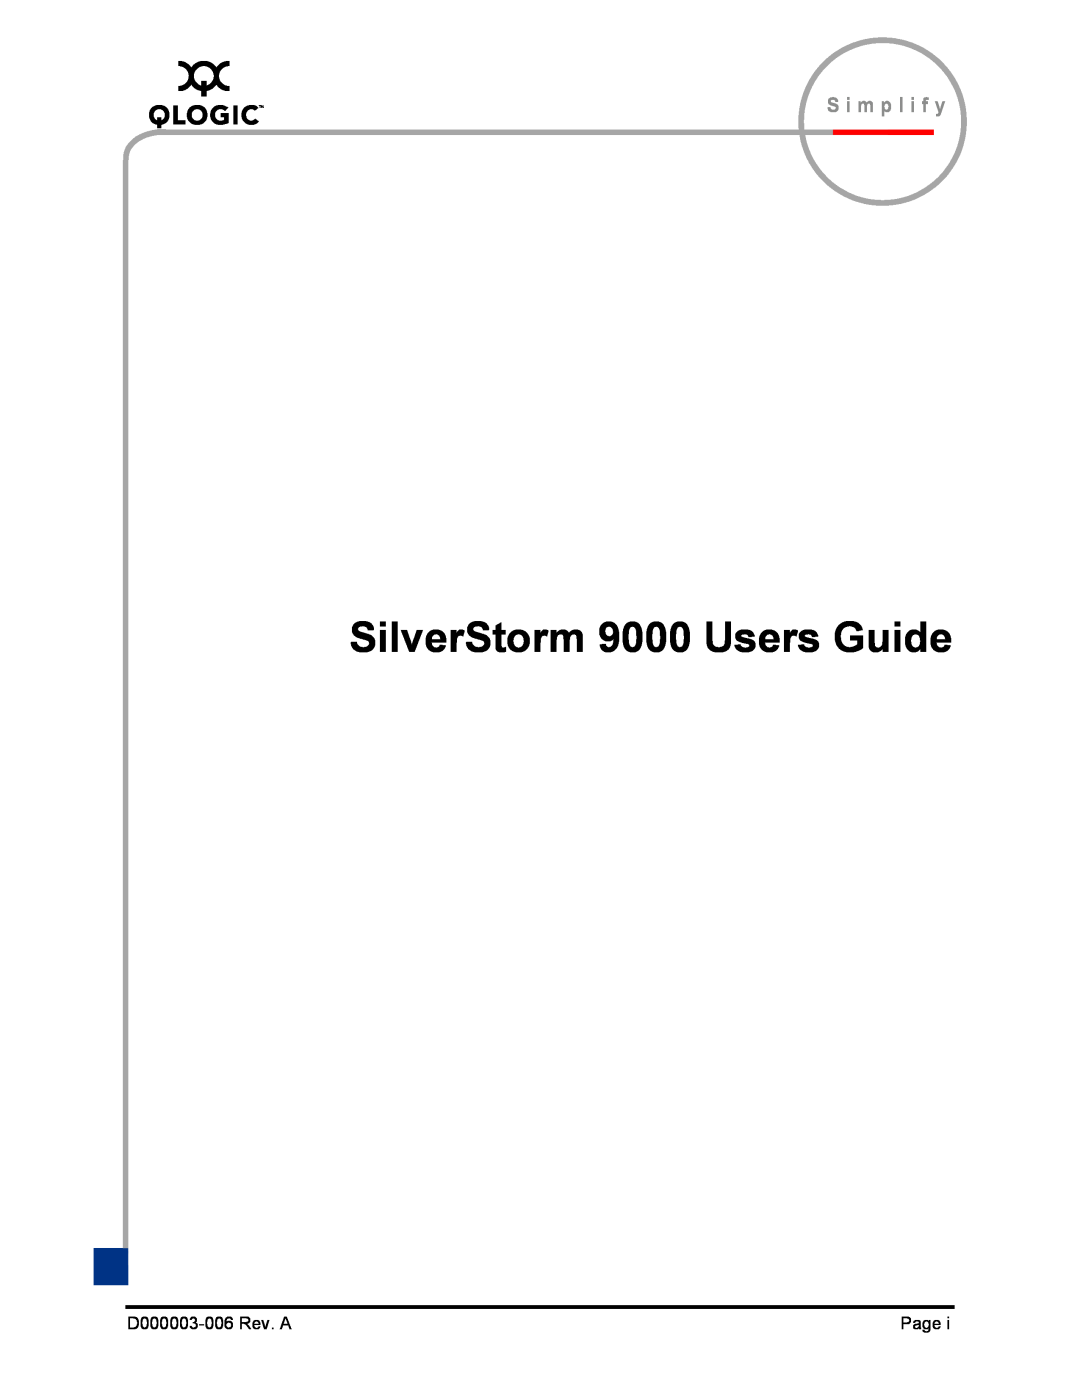 Q-Logic manual SilverStorm 9000 Users Guide, S i m p l i f y, D000003-006 Rev. A, Page 